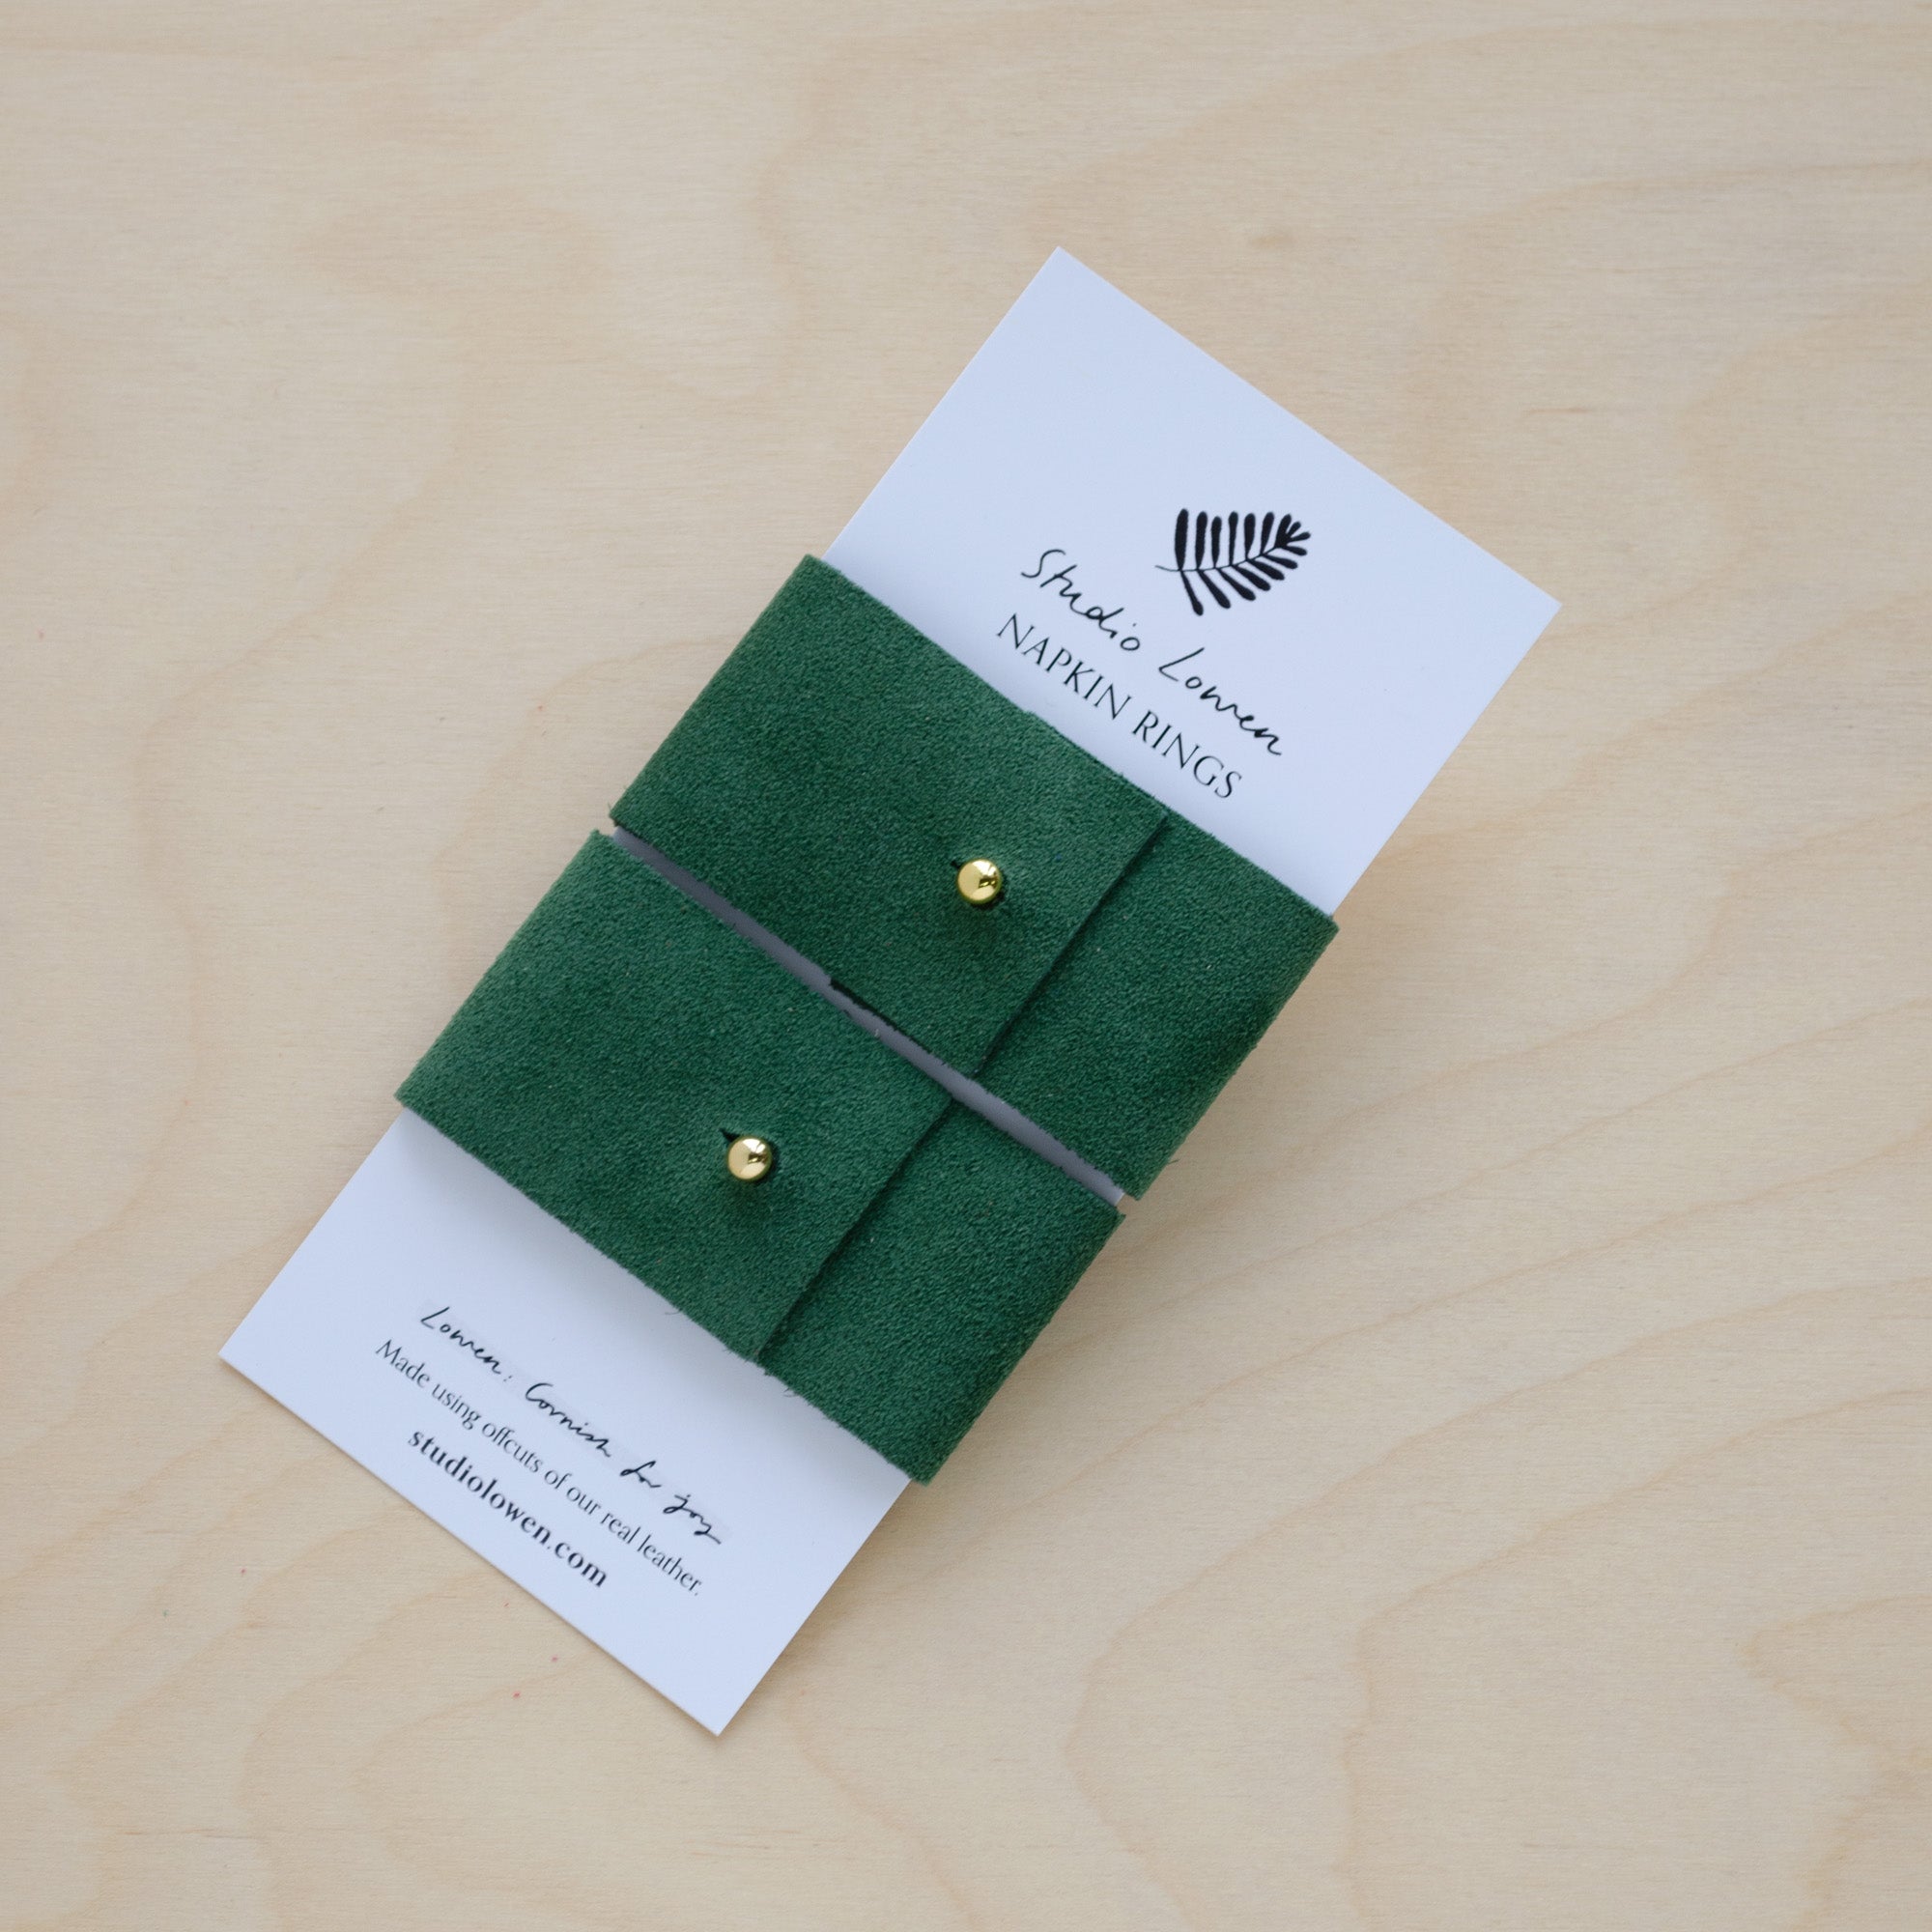 Pair of Moss Green suede napkin ring holders on a white card packaging.